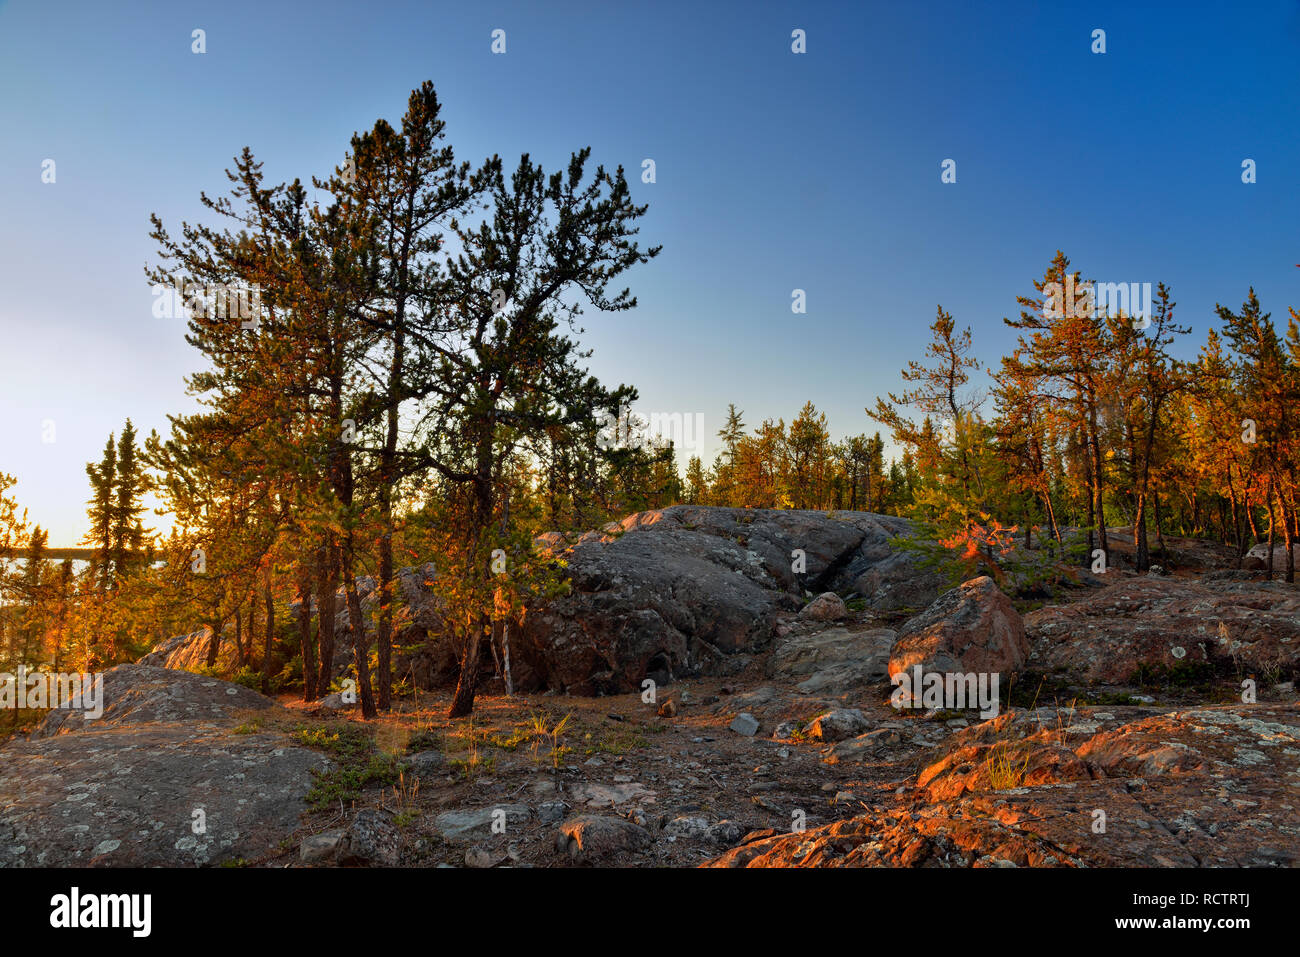 Granite rock outcrops and pine trees, Fred Henne Territorial Park, Yellowknife, Northwest Territories, Canada Stock Photo